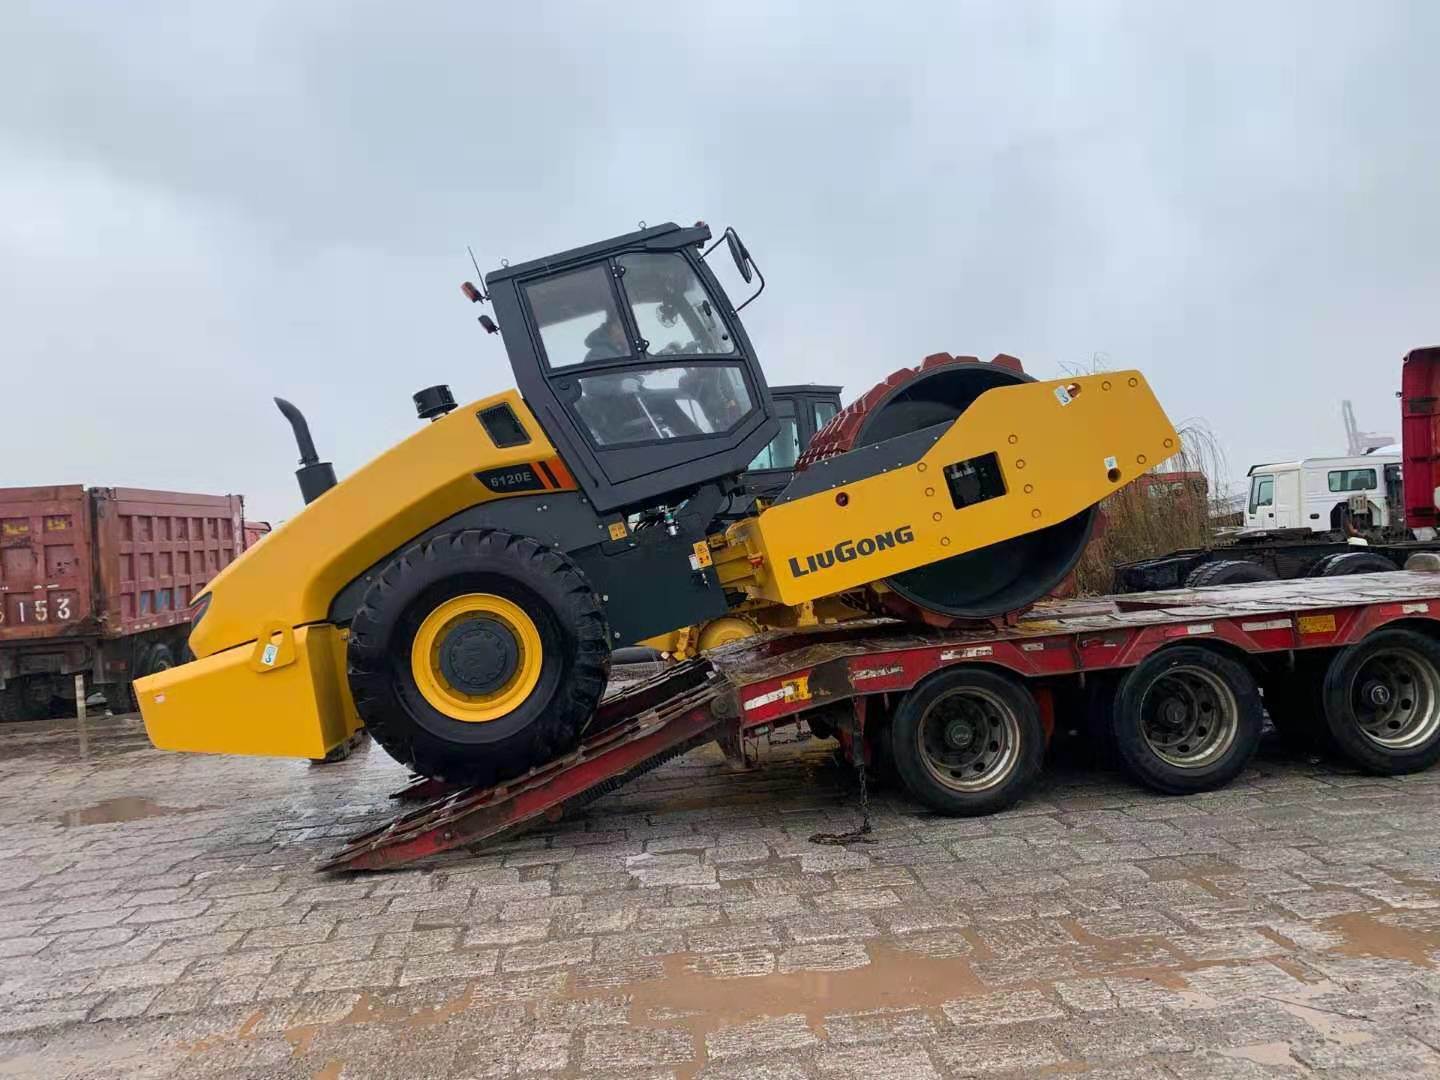 Liugong Clg6120e 20 Ton Hydraulic Single Drum Vibratory Rollers Road Roller